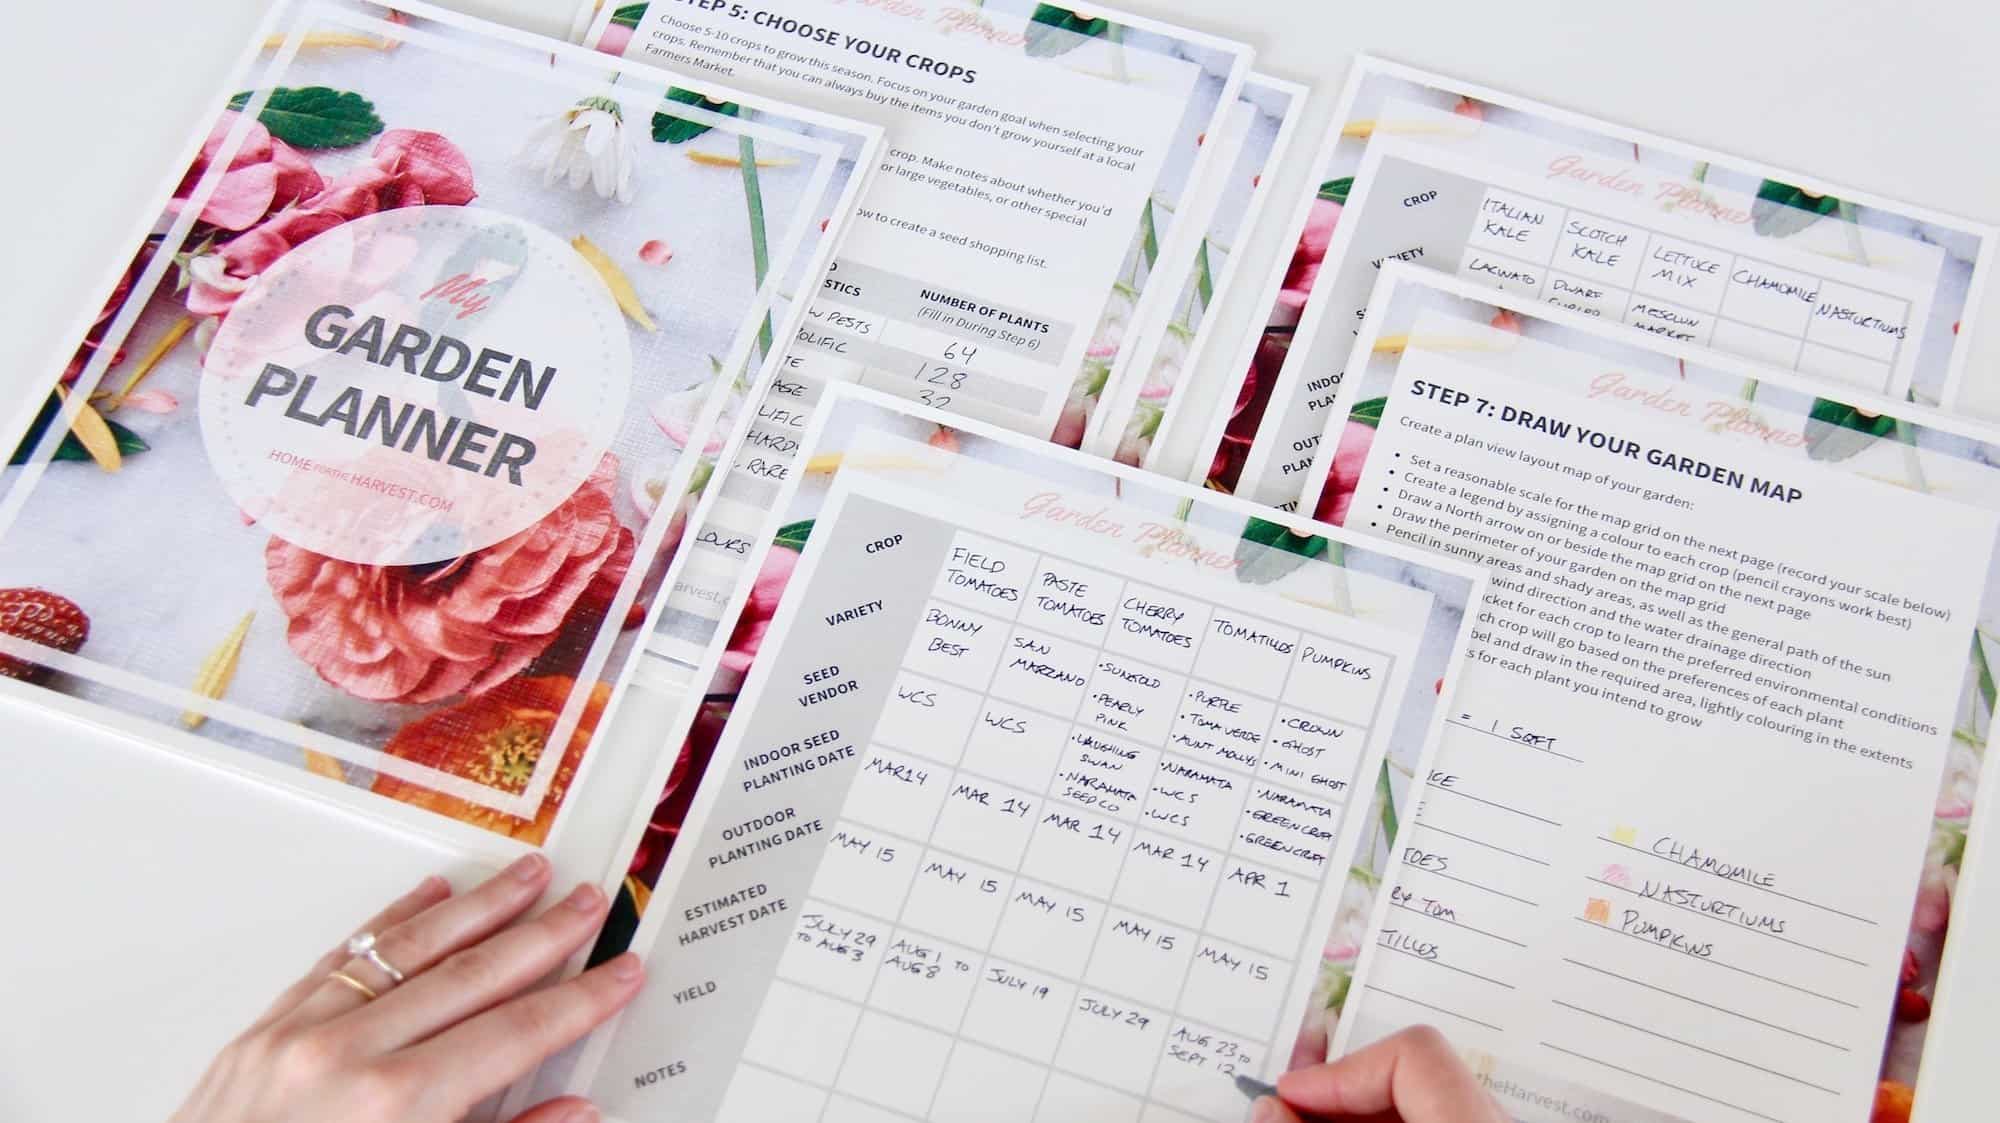 Free garden planner printable - includes crop selection, garden layout mapping, and making a planting schedule | home for the harvest